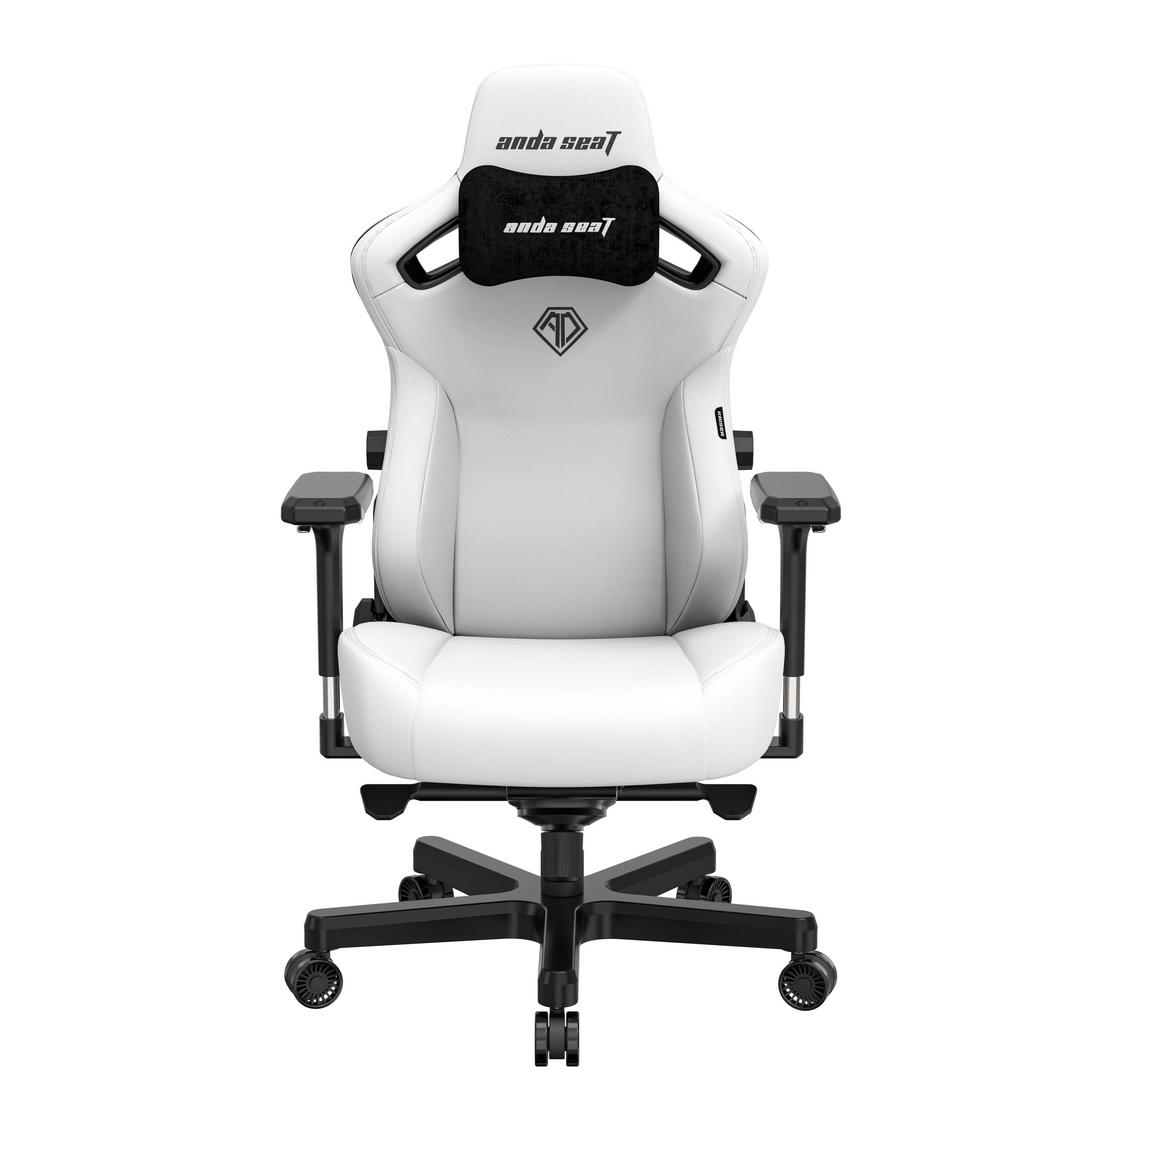 AndaSeat Kaiser 3 L Gaming Chair - White PVC Leather